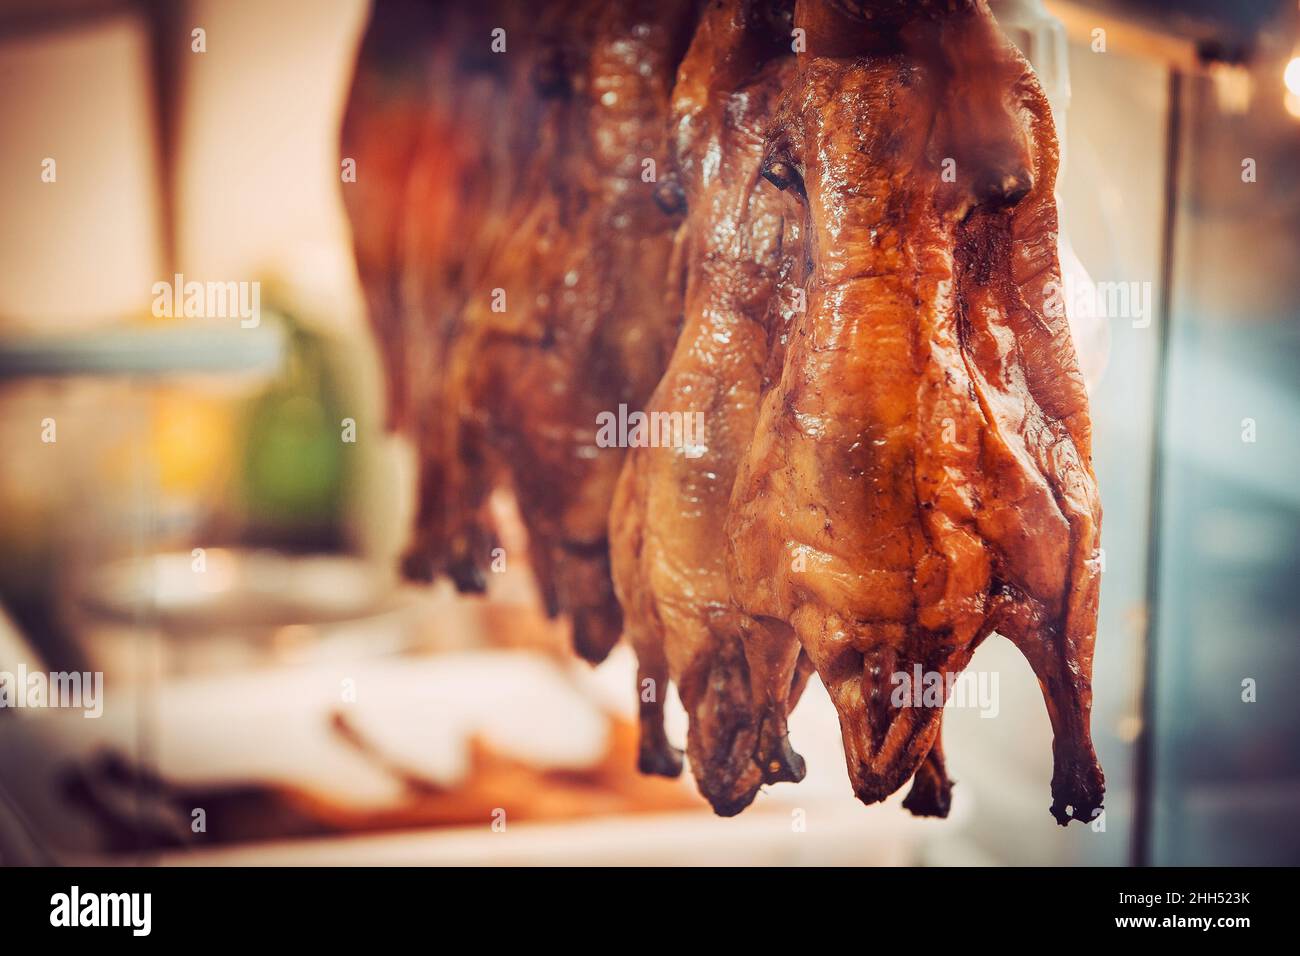 peking duck grilled in kitchen Stock Photo